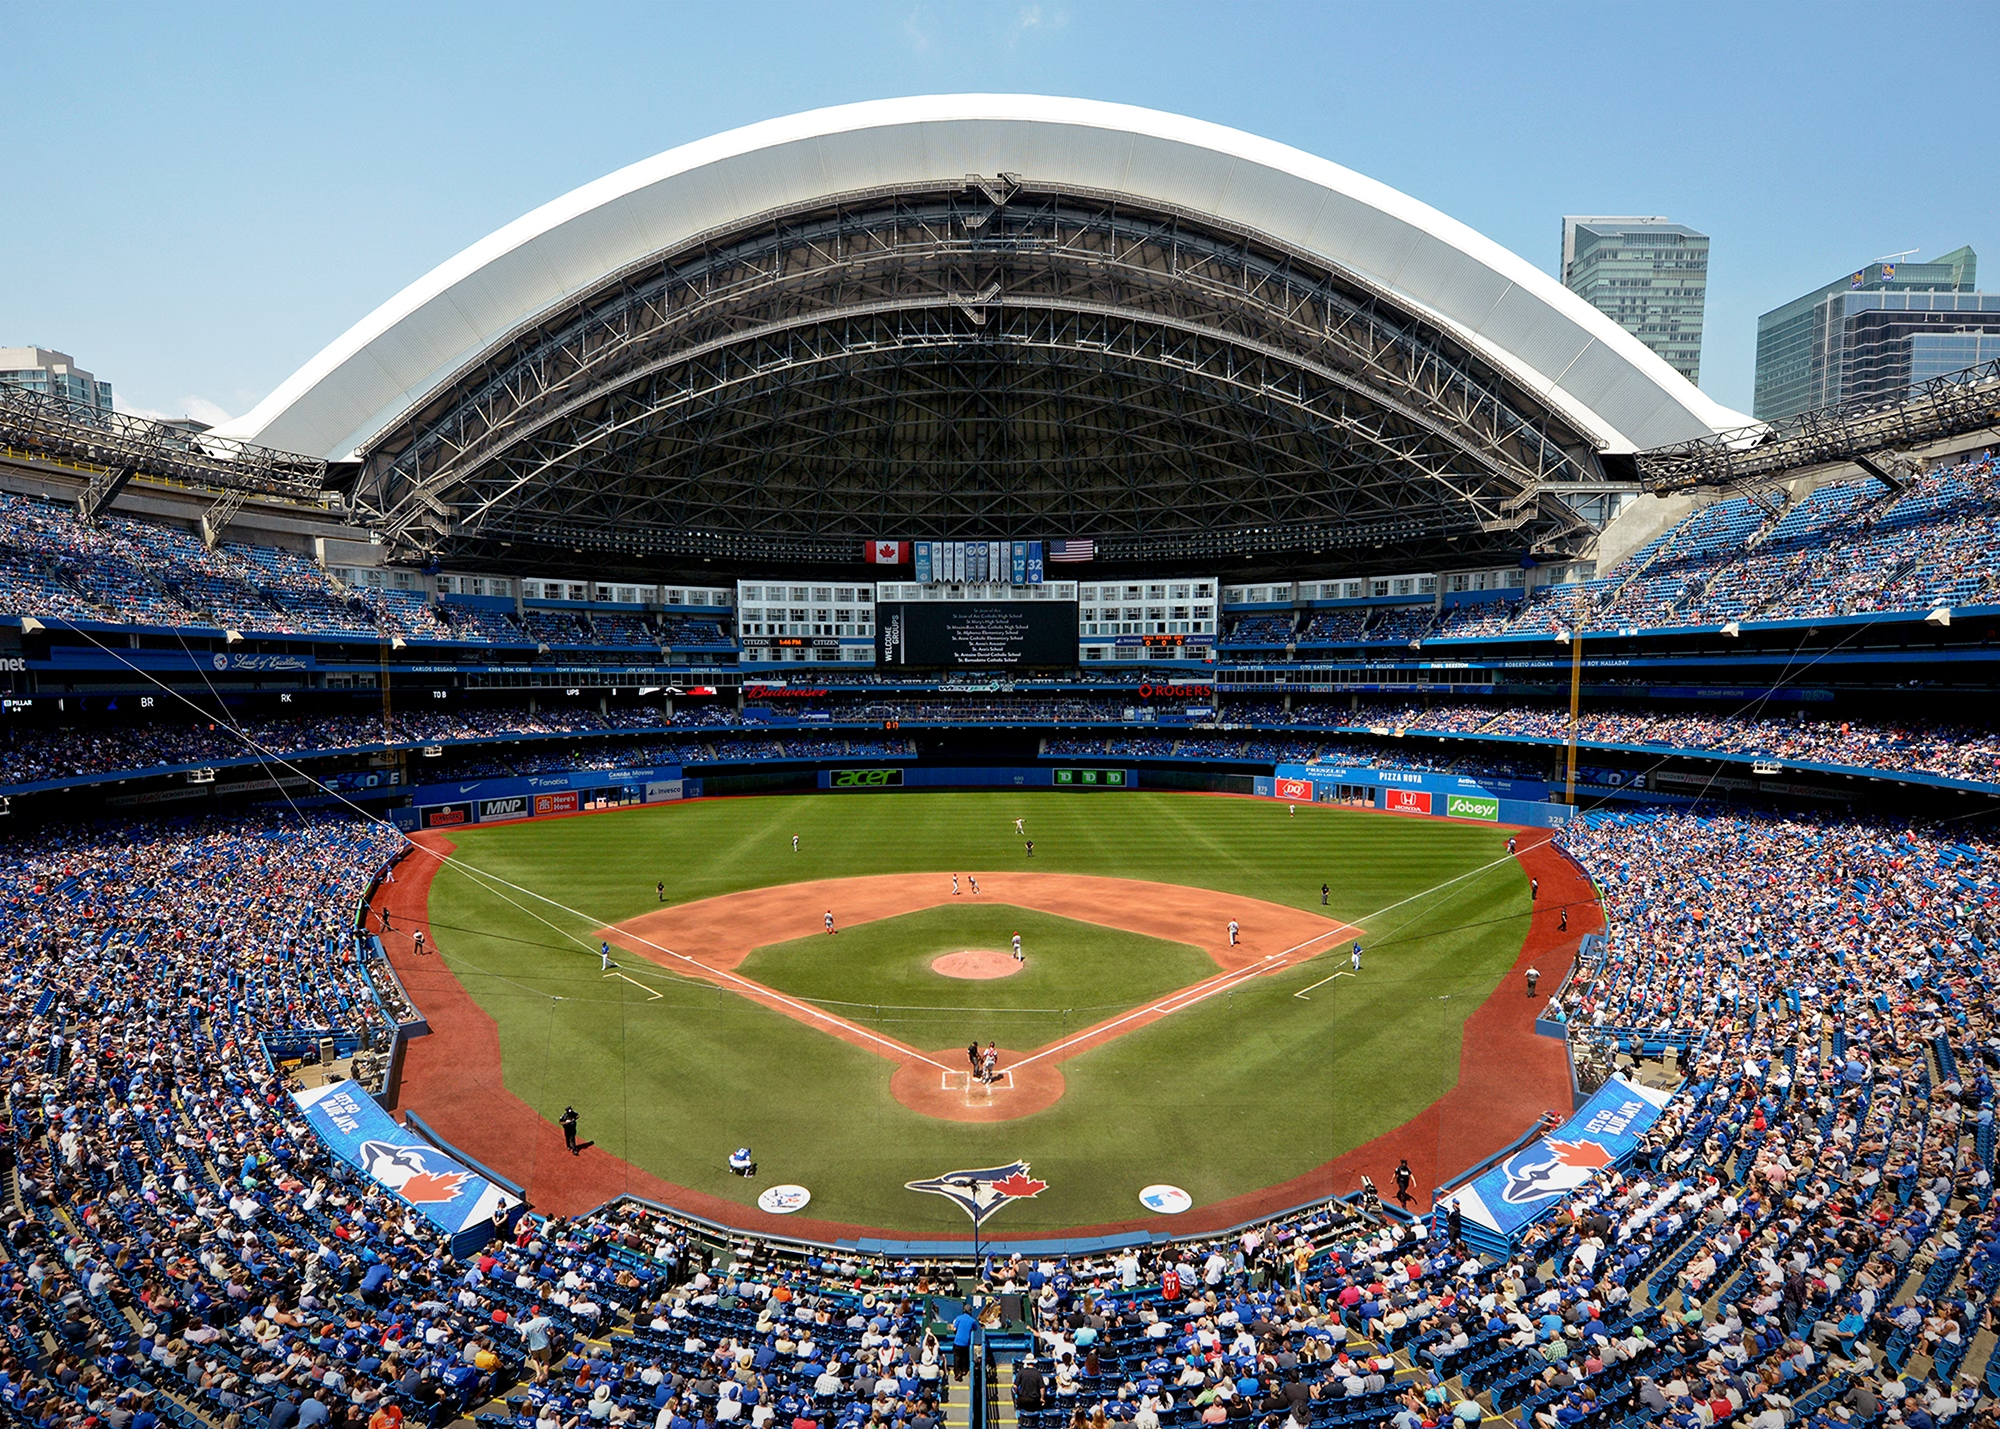 Rogers Centre, section 113, home of Toronto Blue Jays, Toronto